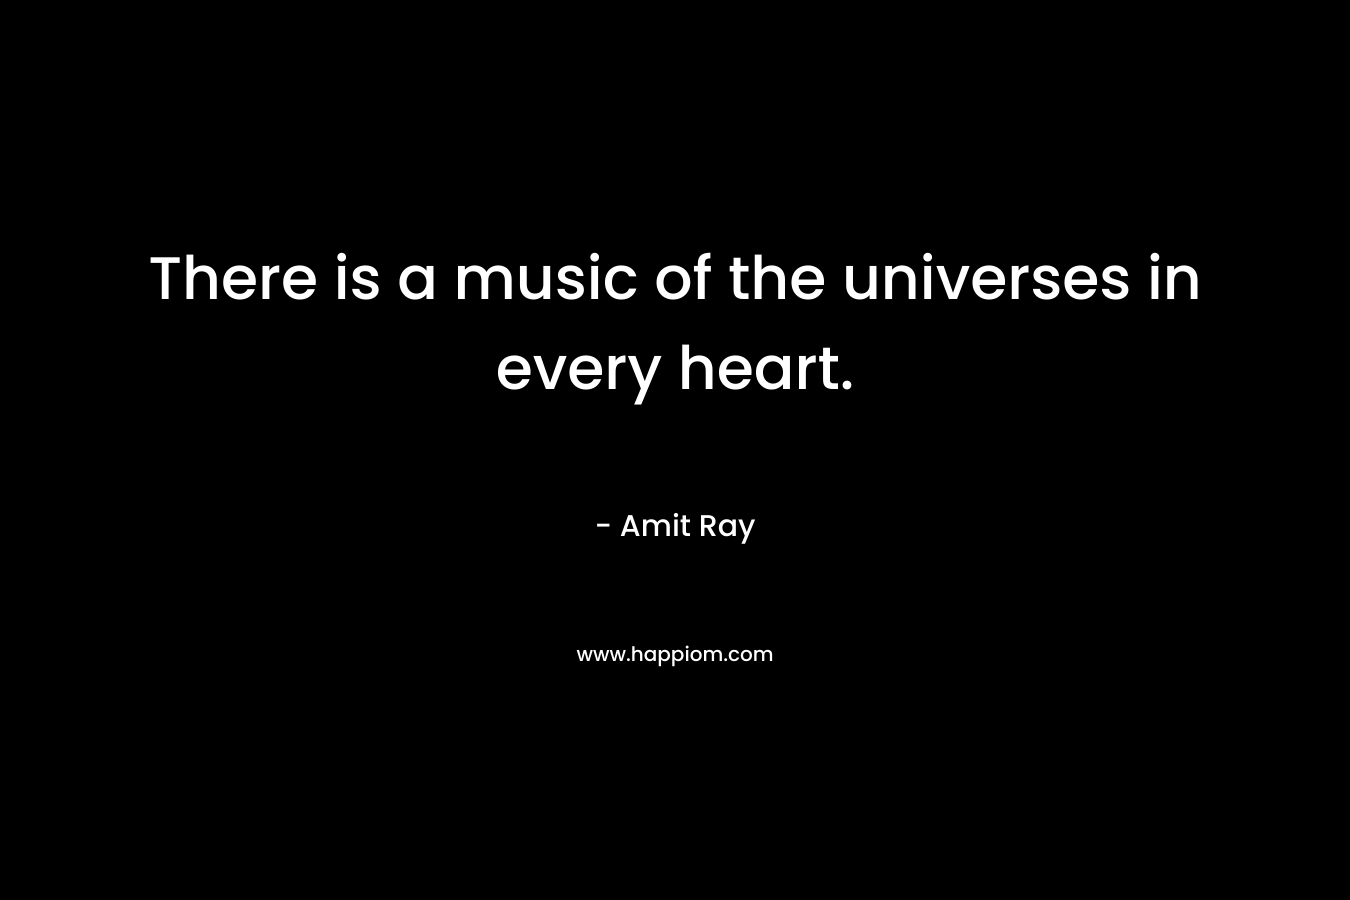 There is a music of the universes in every heart.